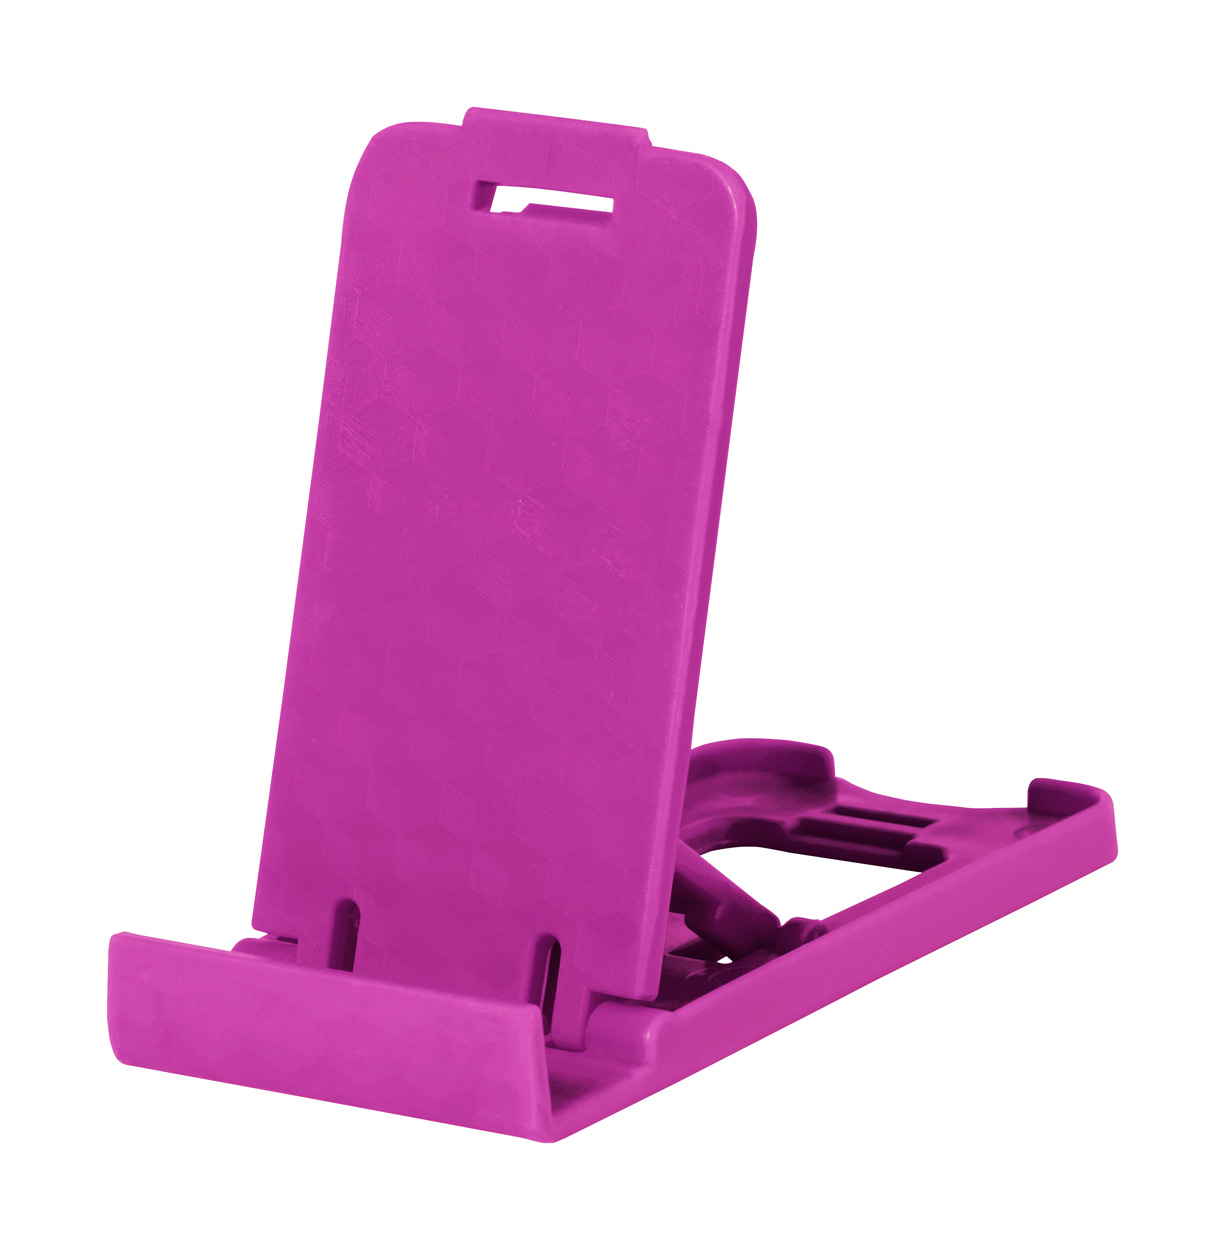 Asher mobile phone stand - pink